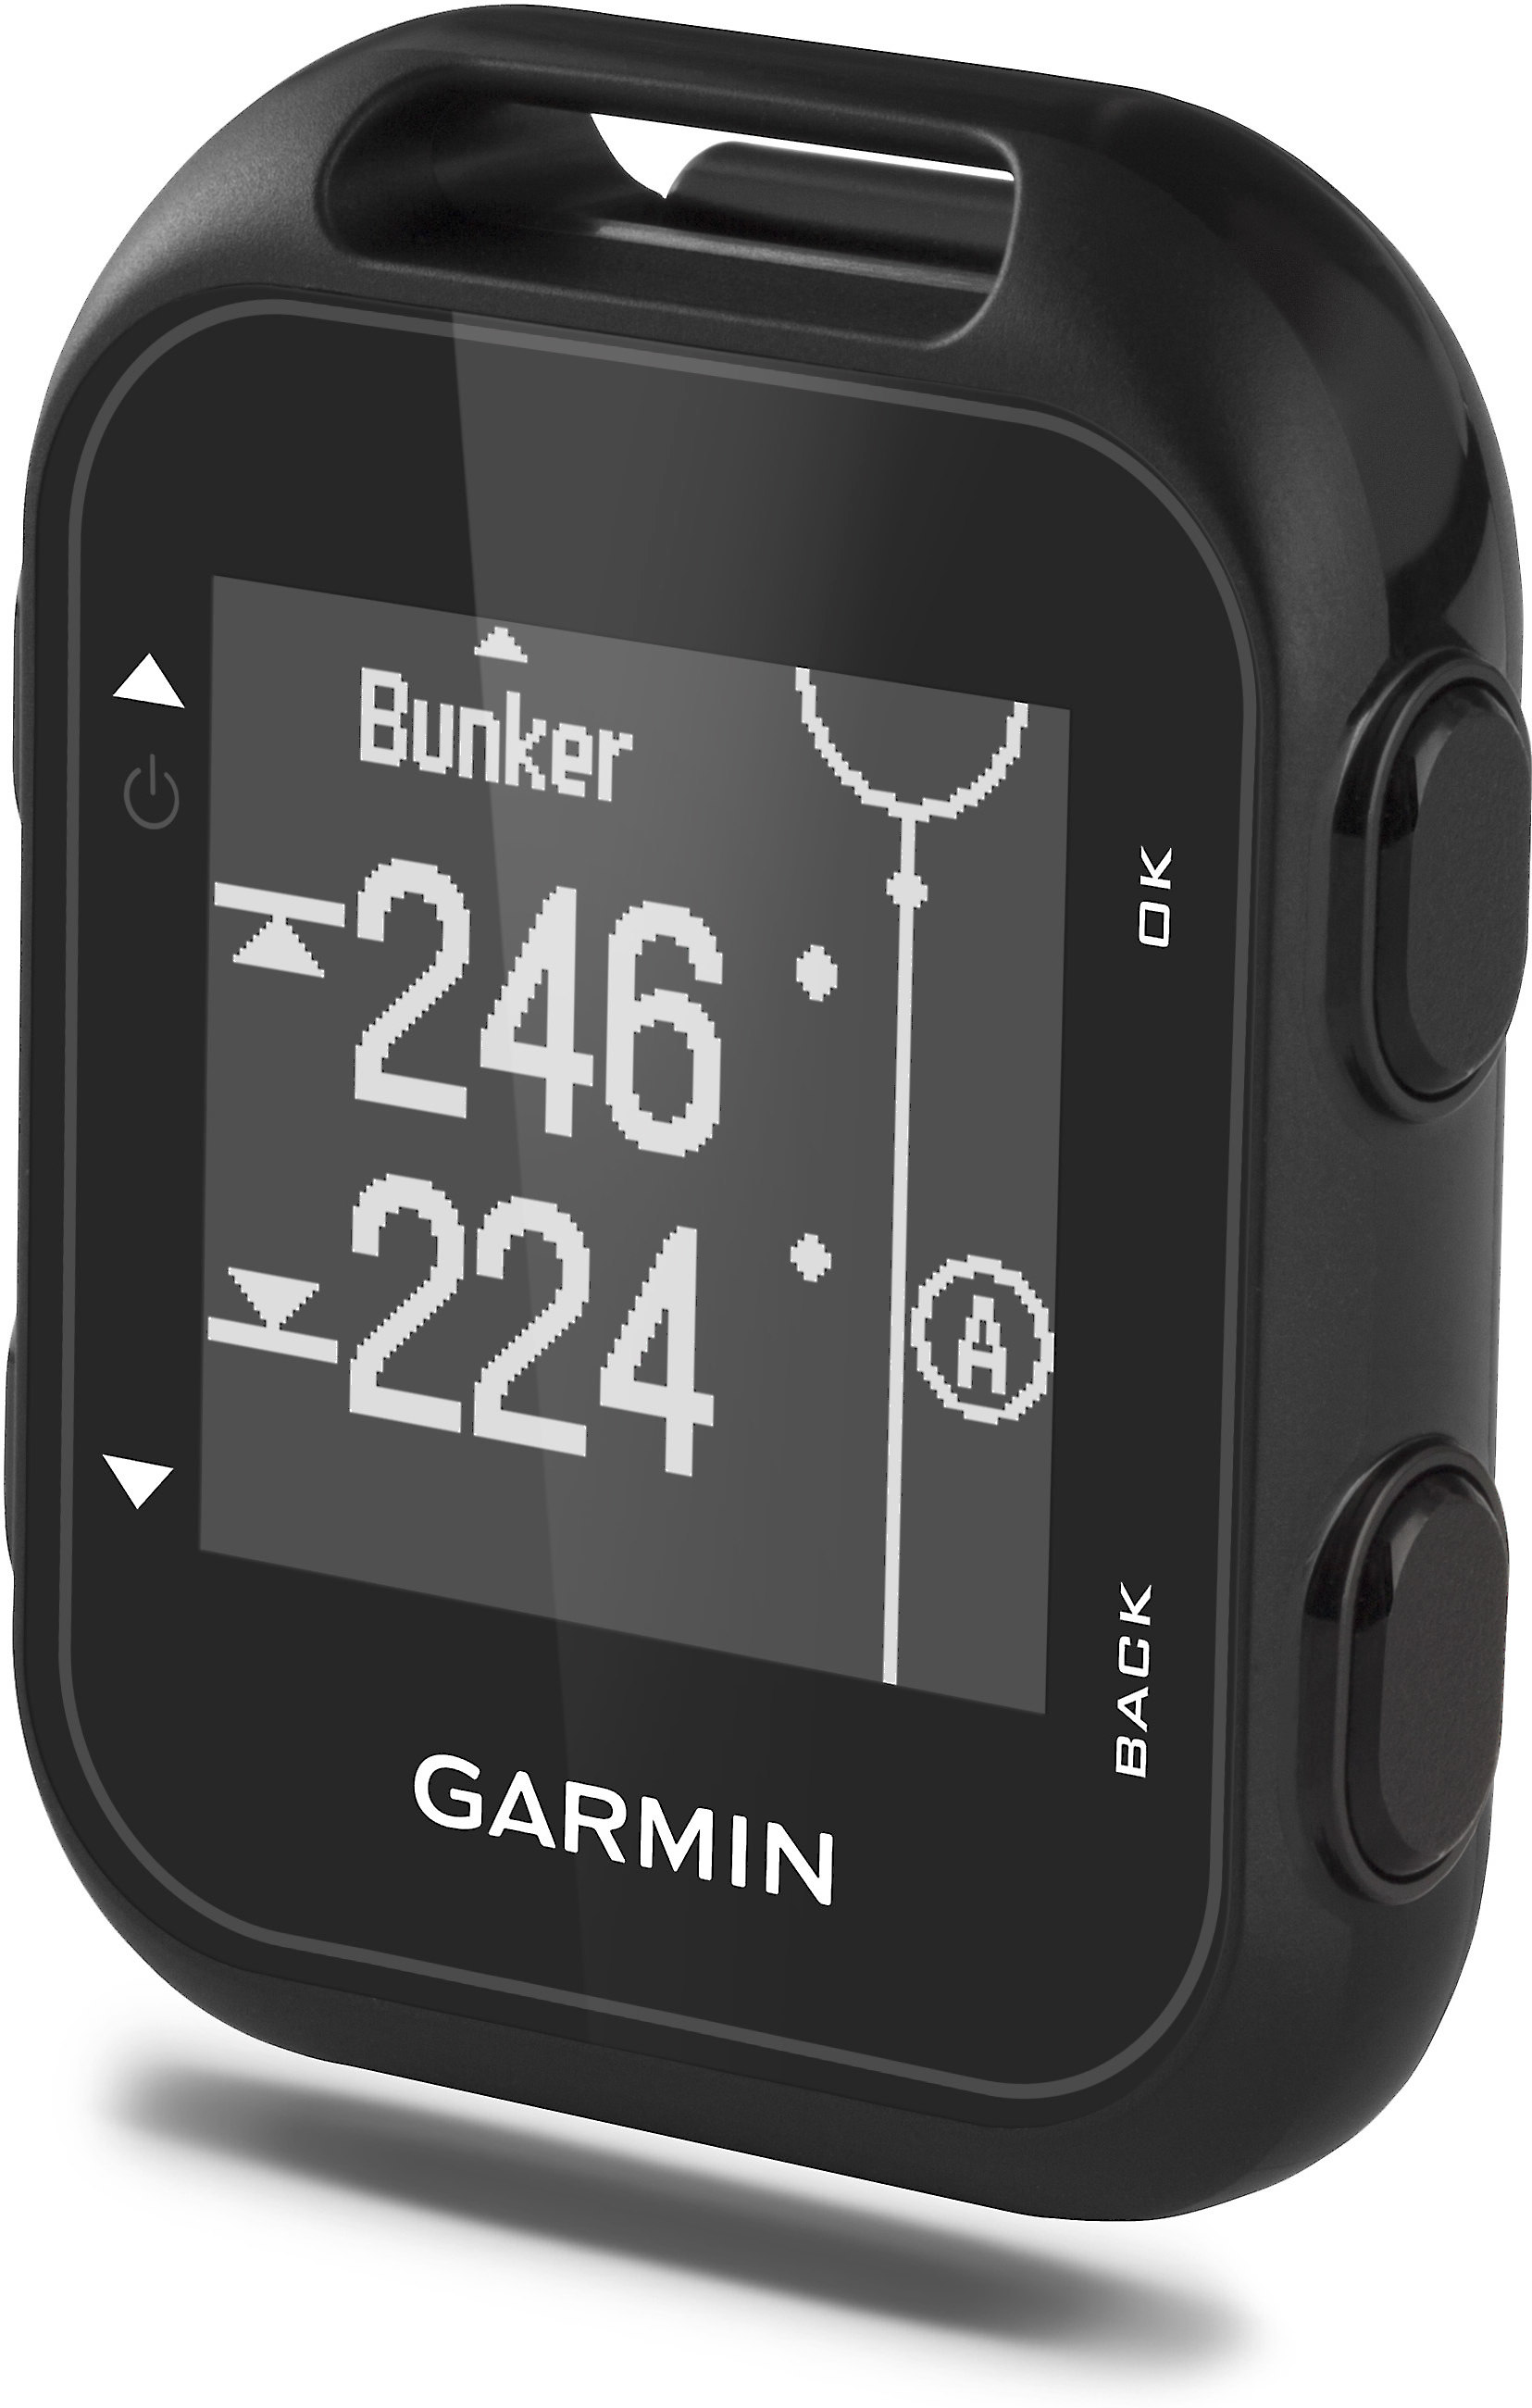 Customer Garmin Approach® G10 Handheld golf GPS — covers over 40,000 courses worldwide at Crutchfield